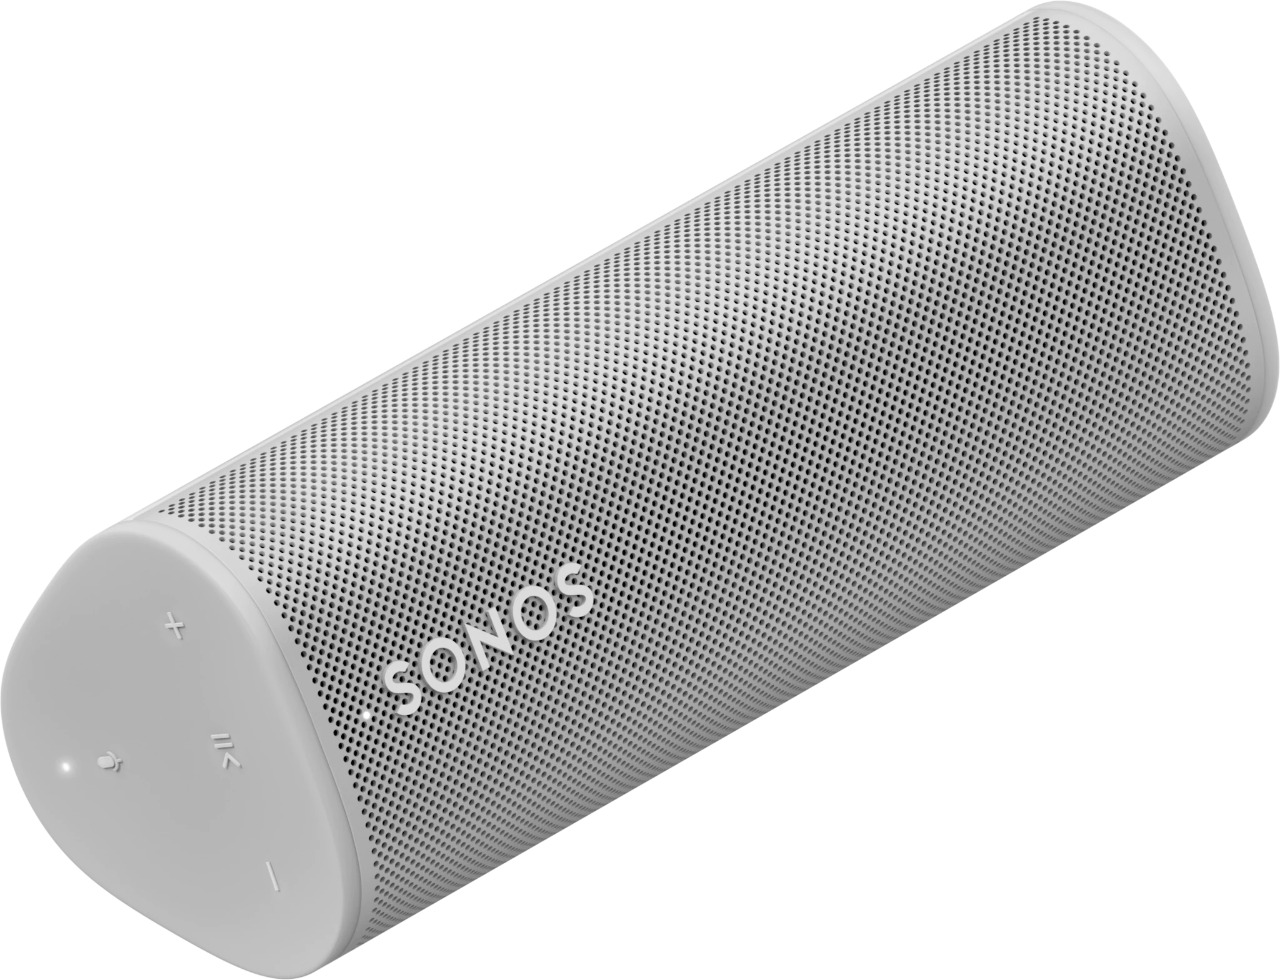 Sonos stopped working (Reasons & Solutions)2